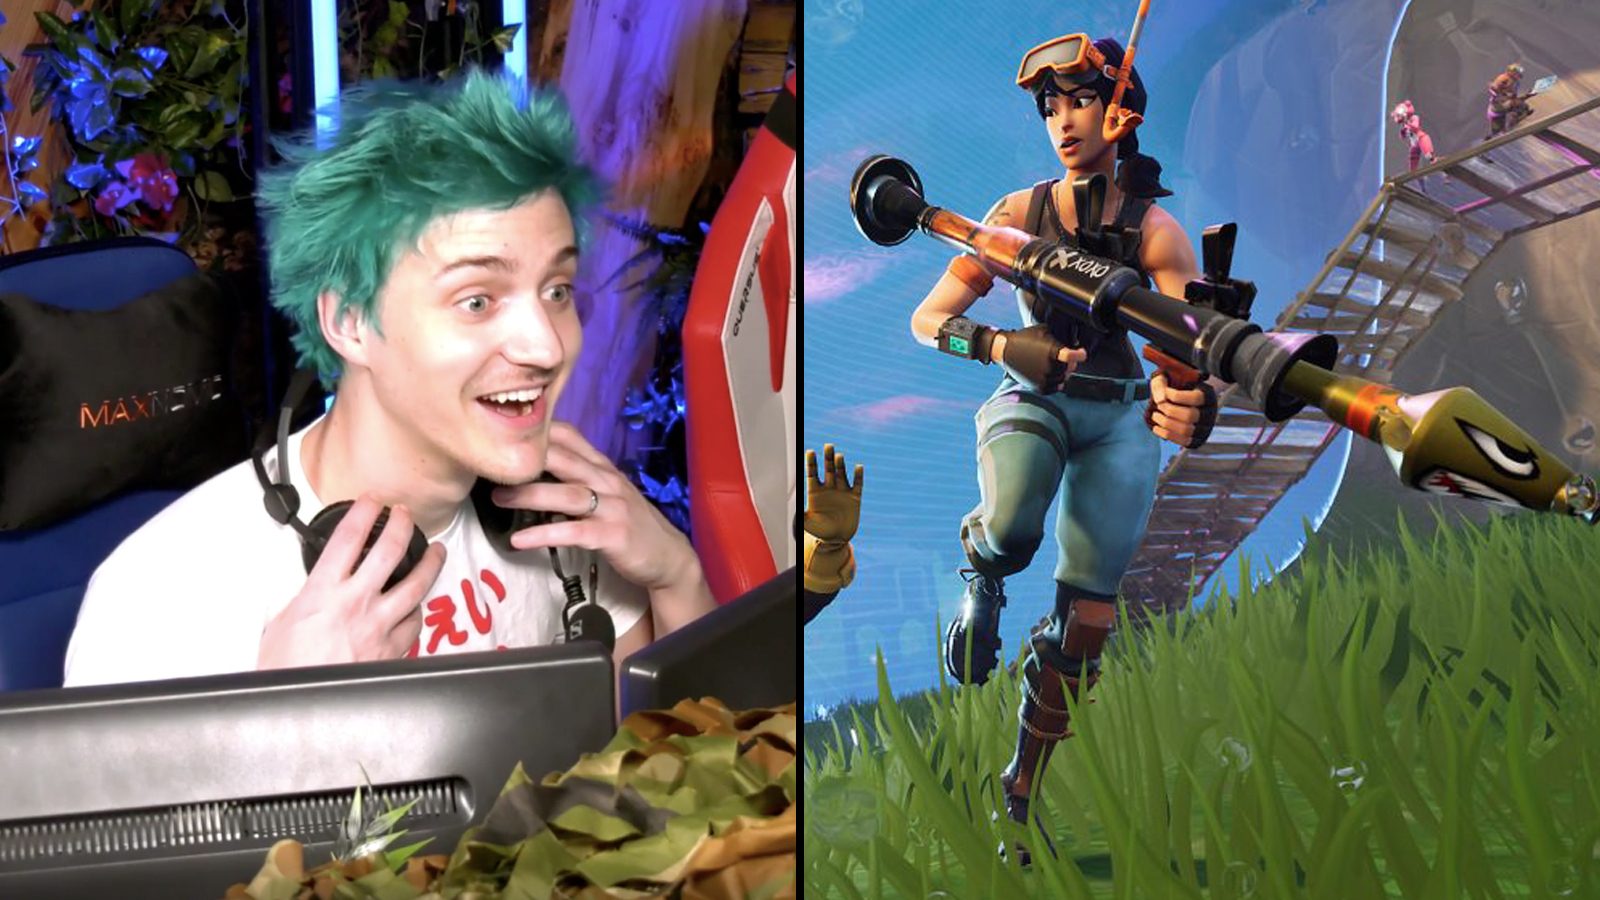 Ninja' Blevins: From a fast food job to millionaire Fortnite gamer